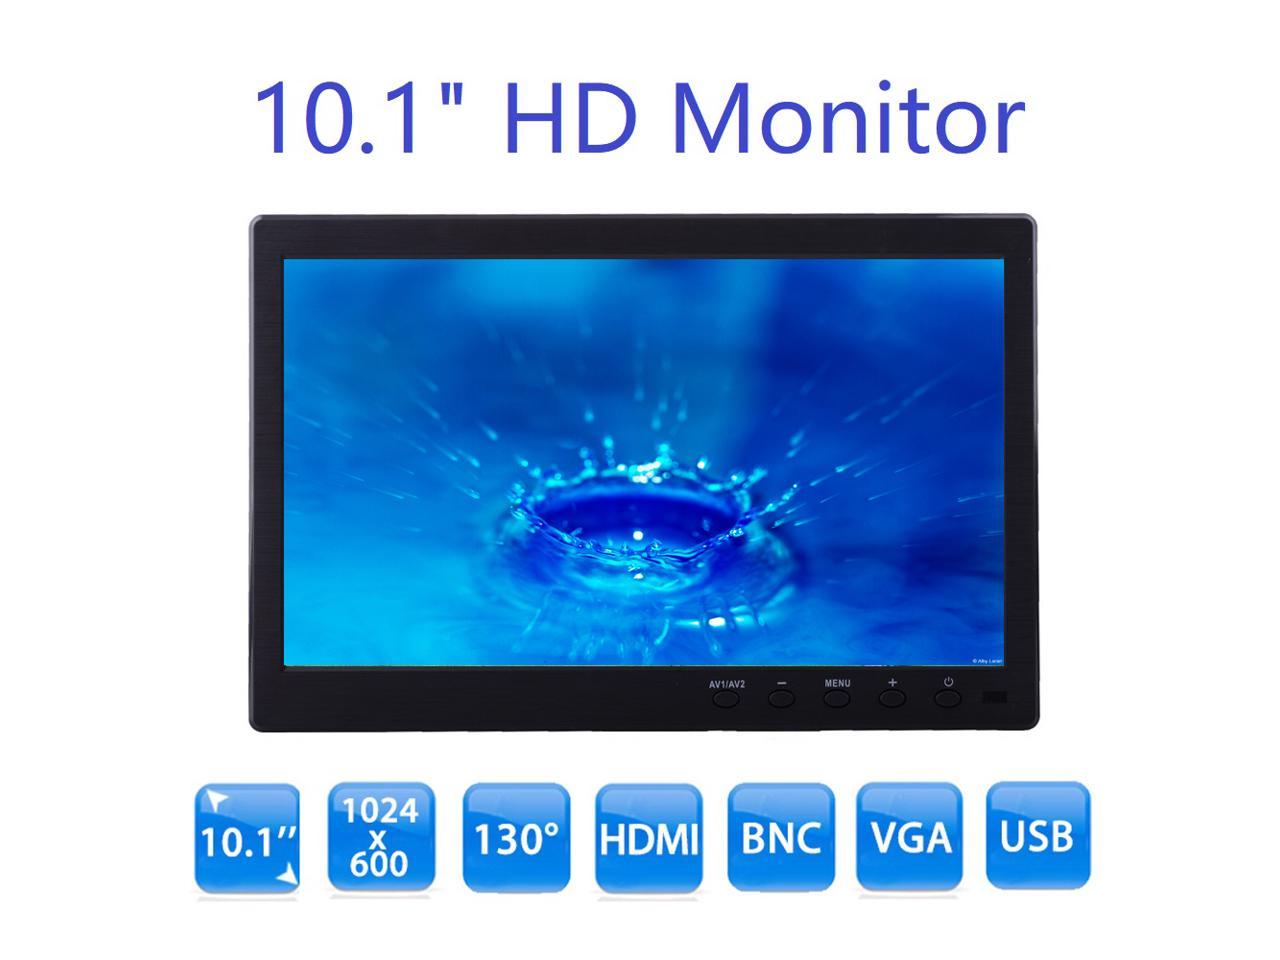 Highlight LED/CCFL Lamps, 300cd/M2, 800 * 600 Resolution BW 10 inch LCD Color Multimedia Monitor CCTV Monitor with HDMI/AV/VGA/BNC Inputs for PC CCTV Camera Security DVR System 